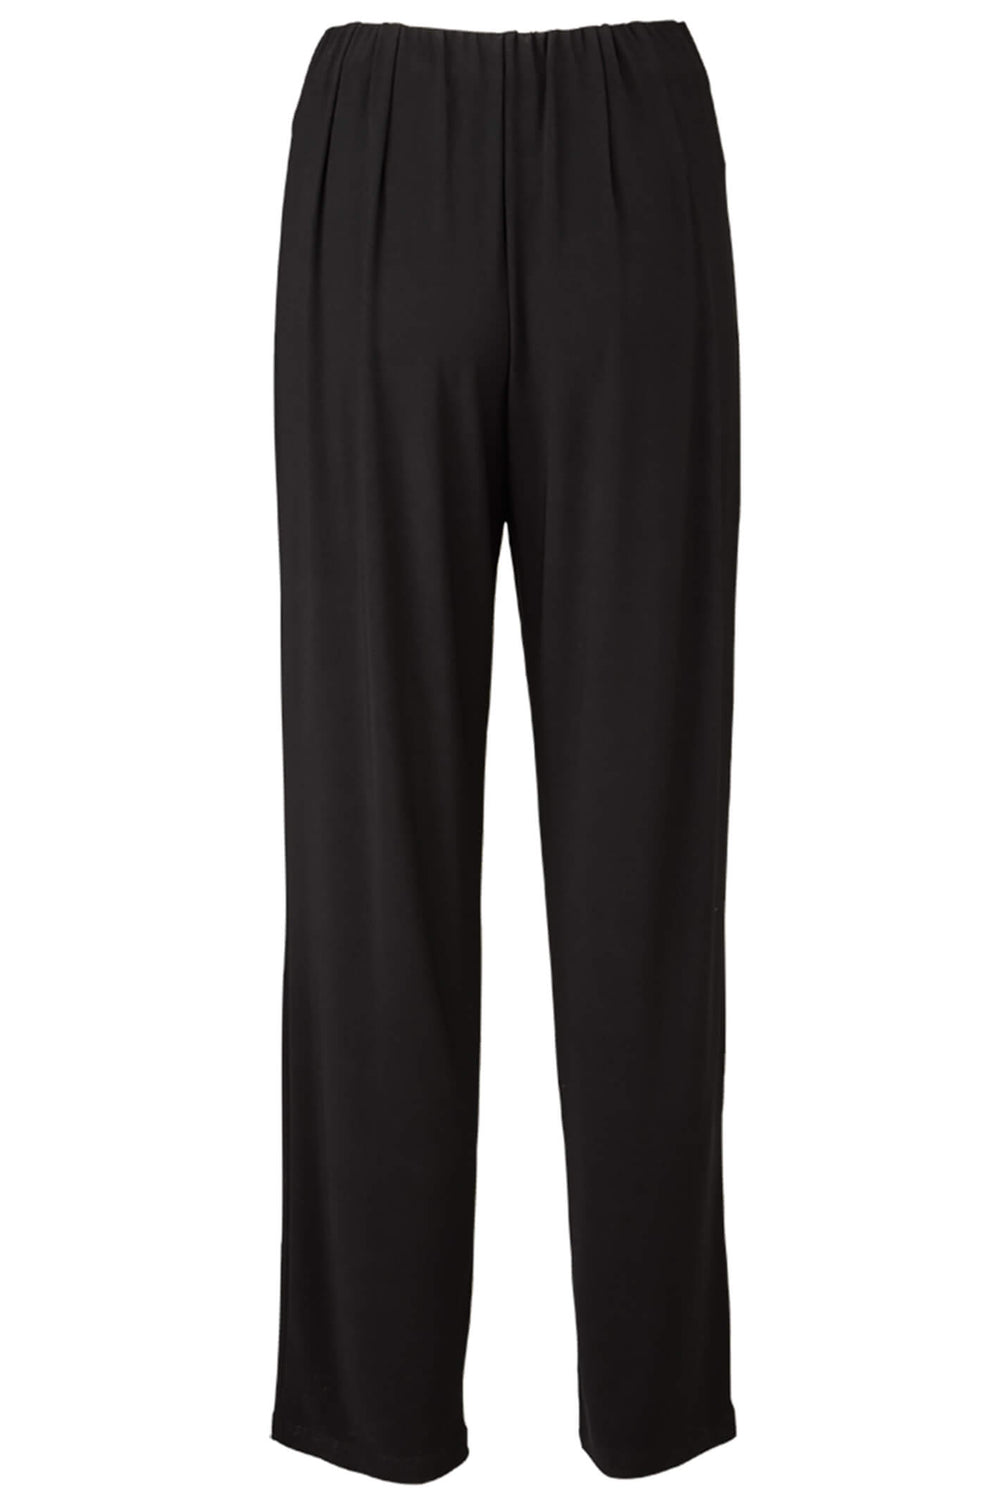 Tia 71179-7093 9000 Black Pull-On Trousers - Dotique